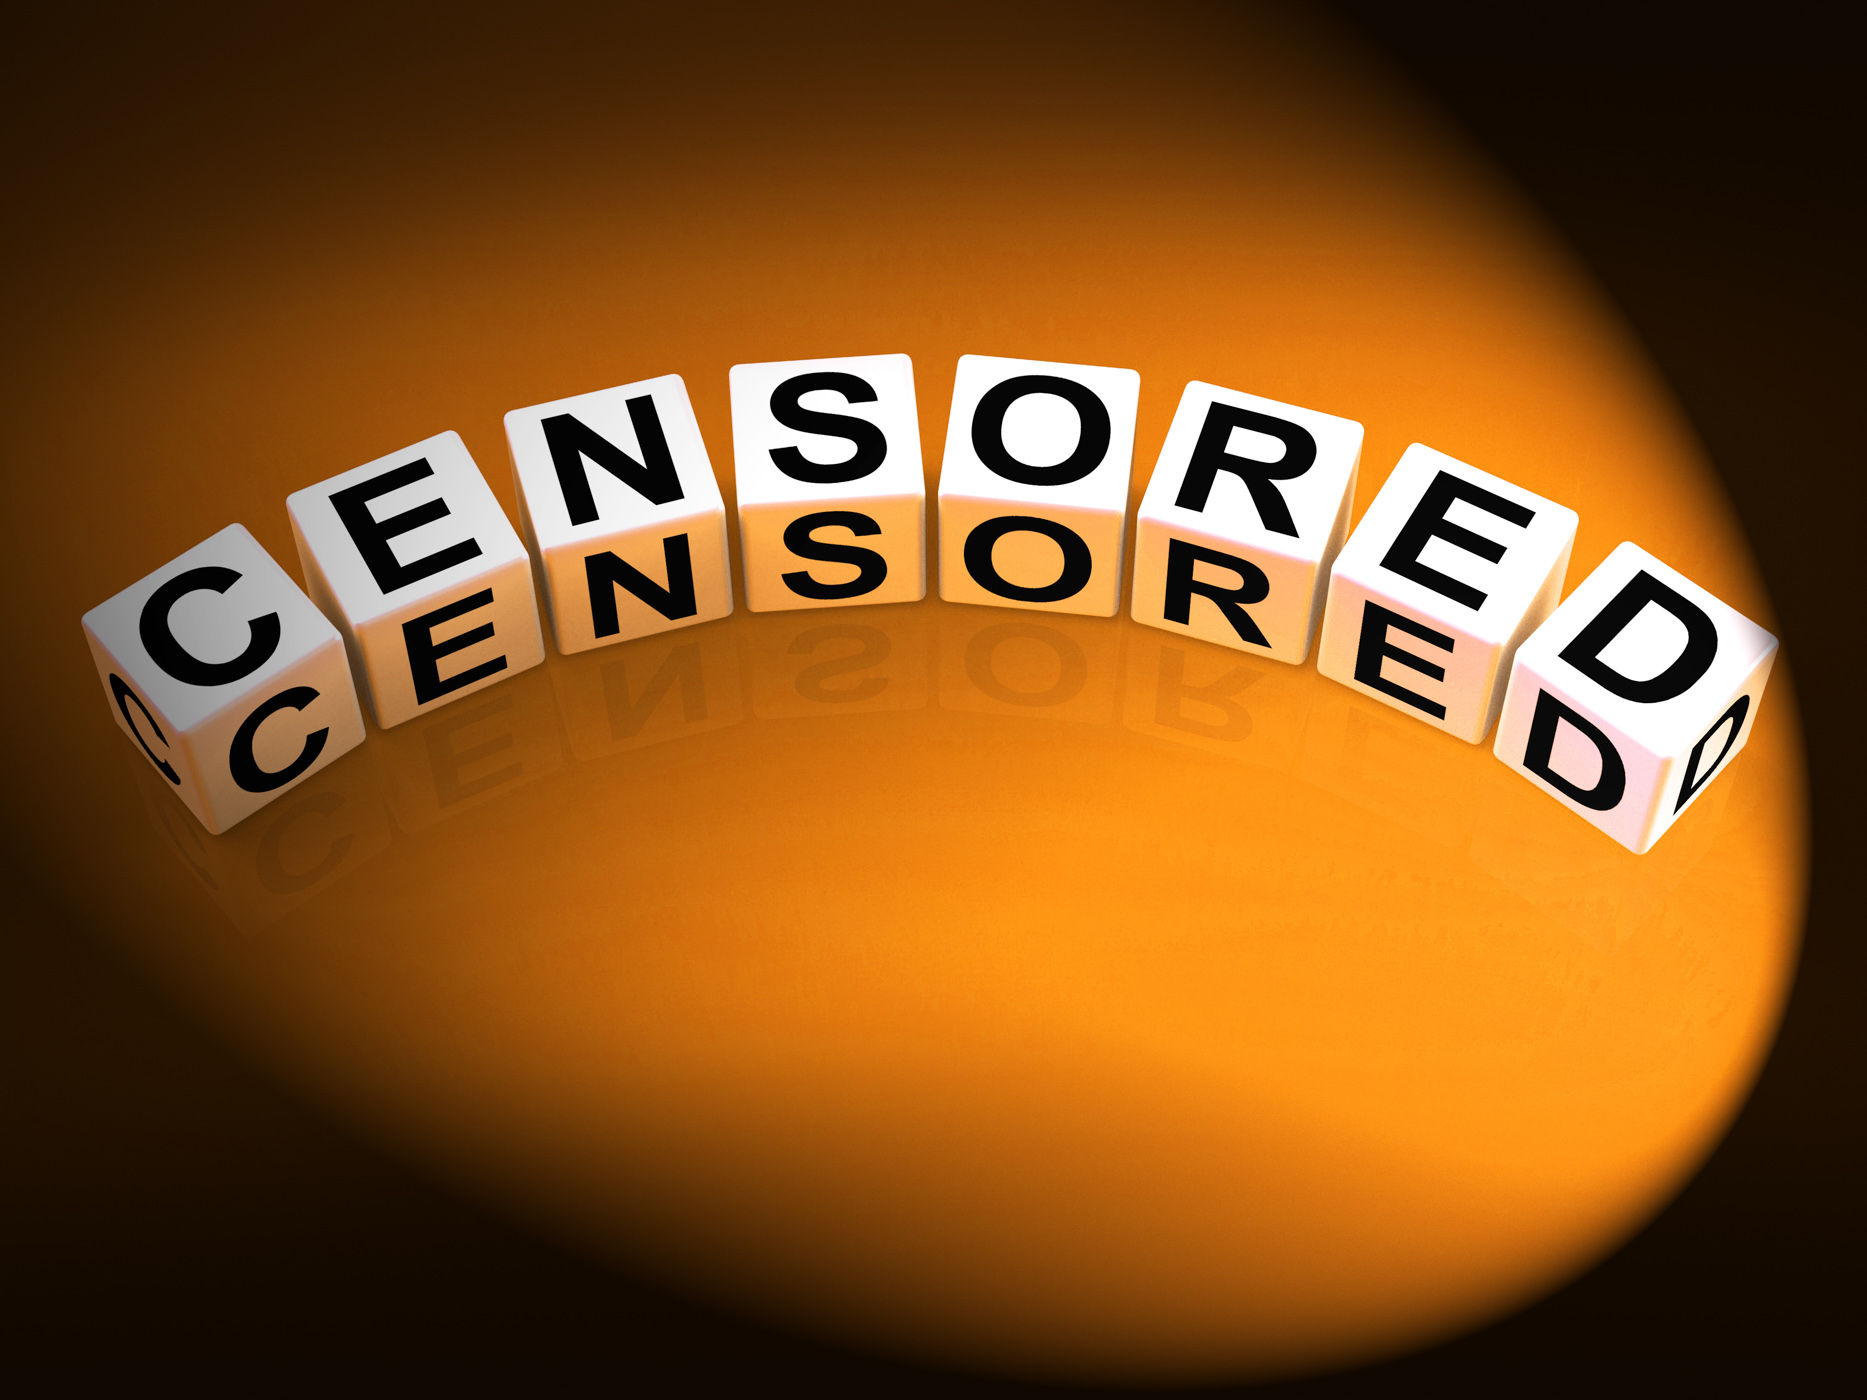 Censored dice show edited blacklisted and forbidden photo